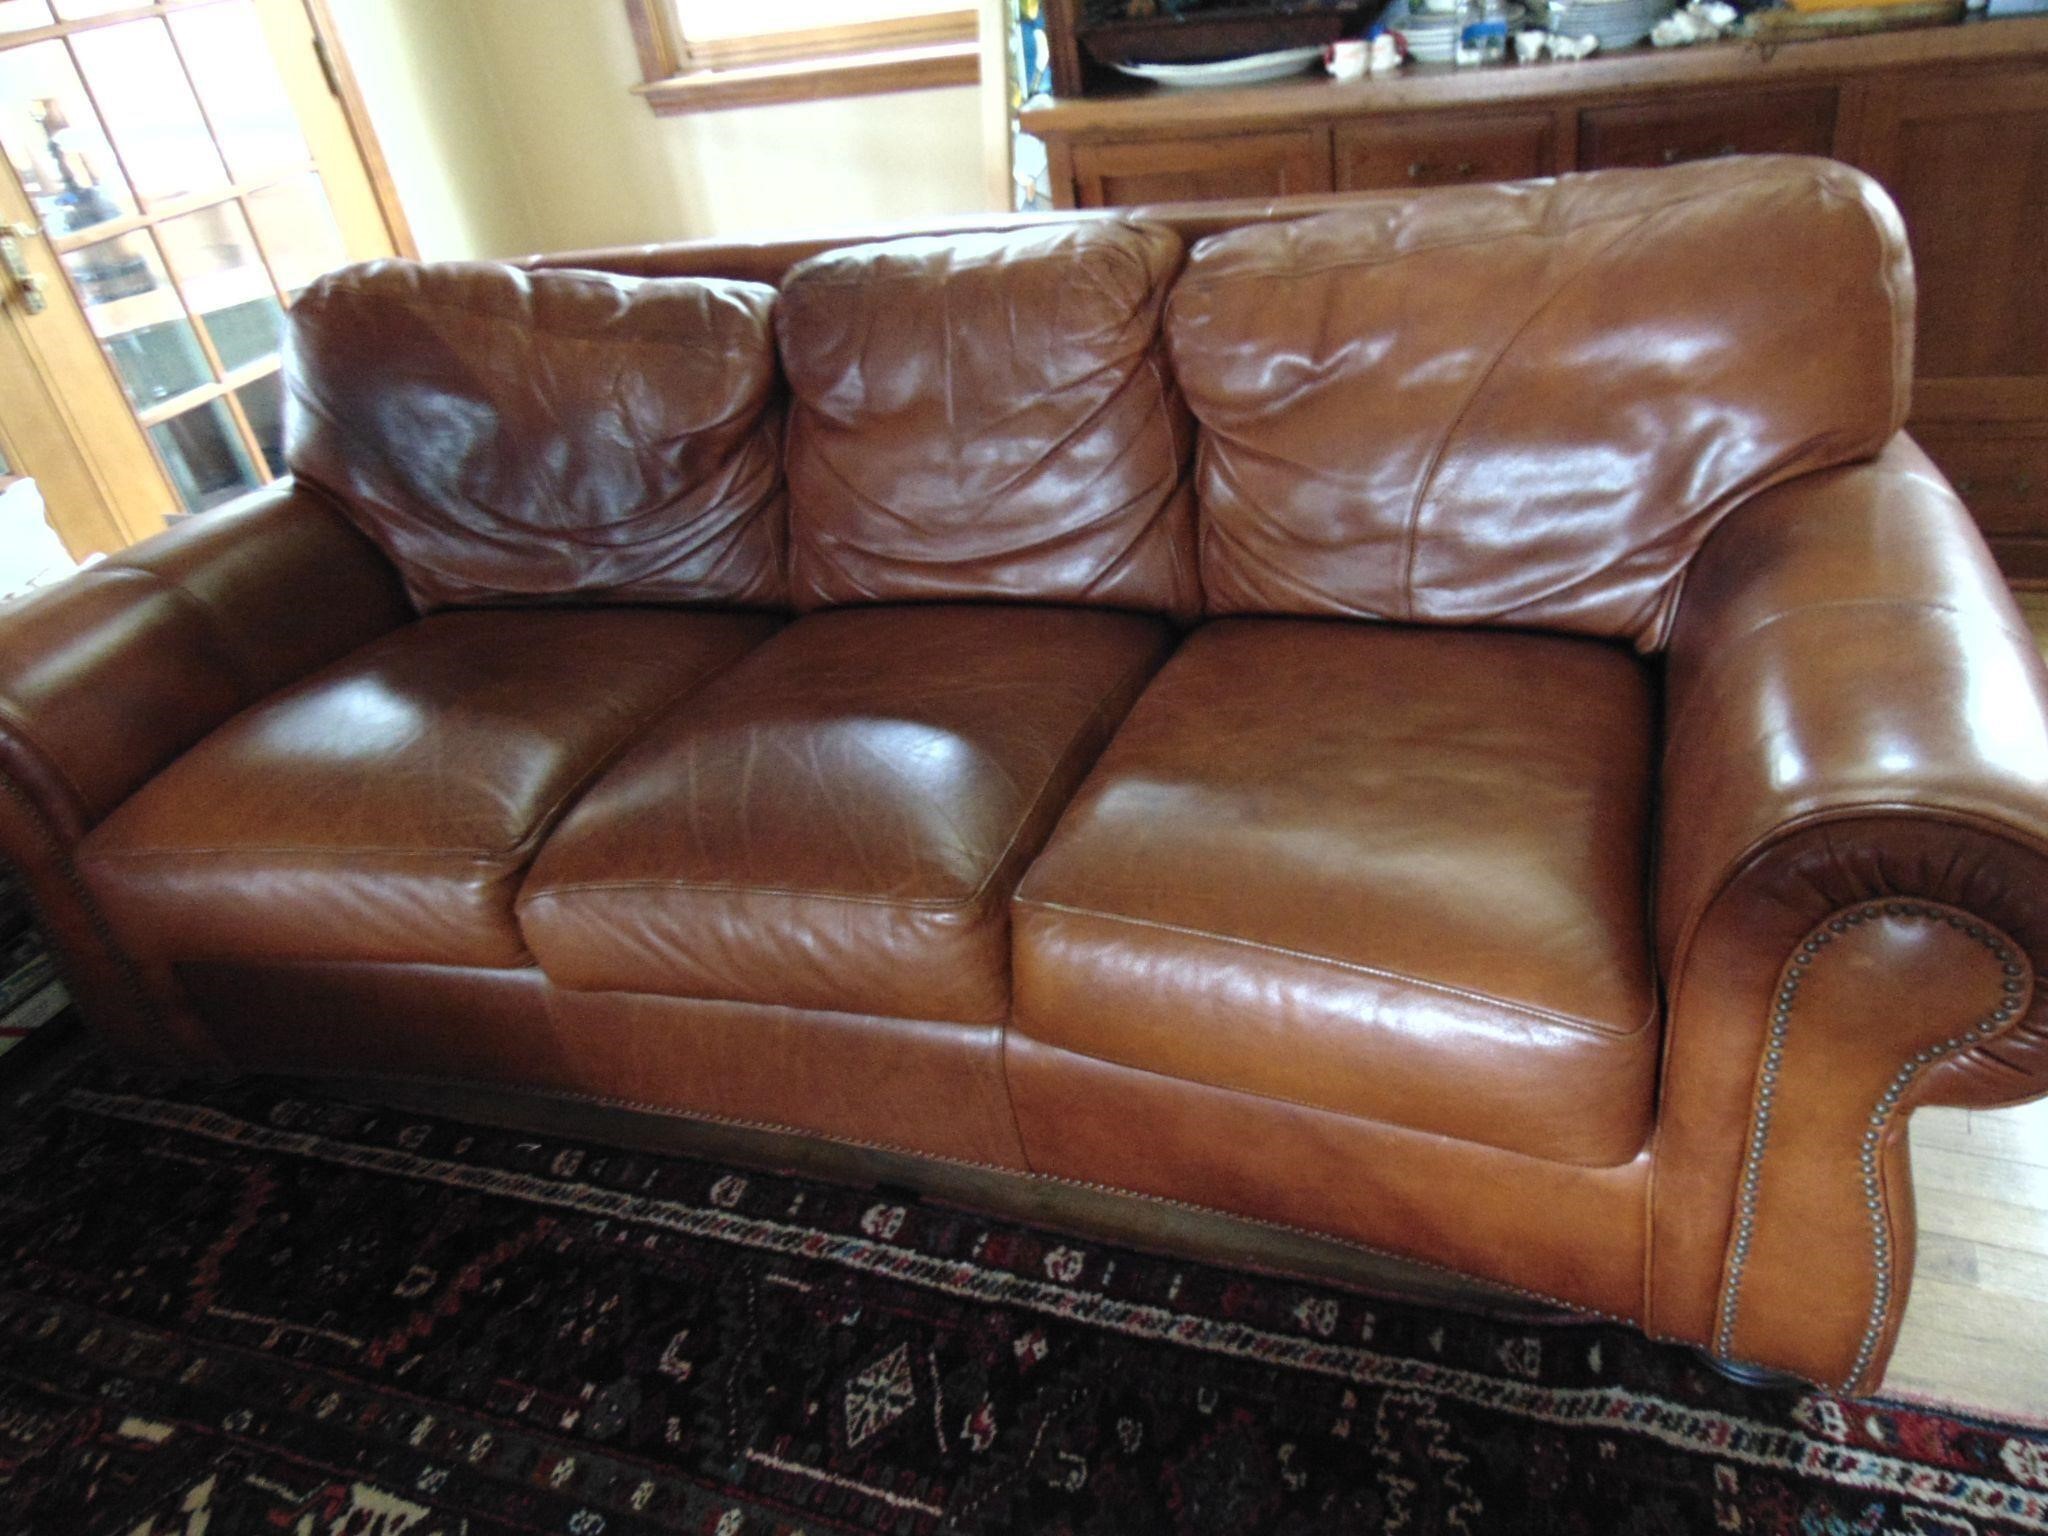 Three Seater Sofa. All Leather, Solid, Nice - 86"